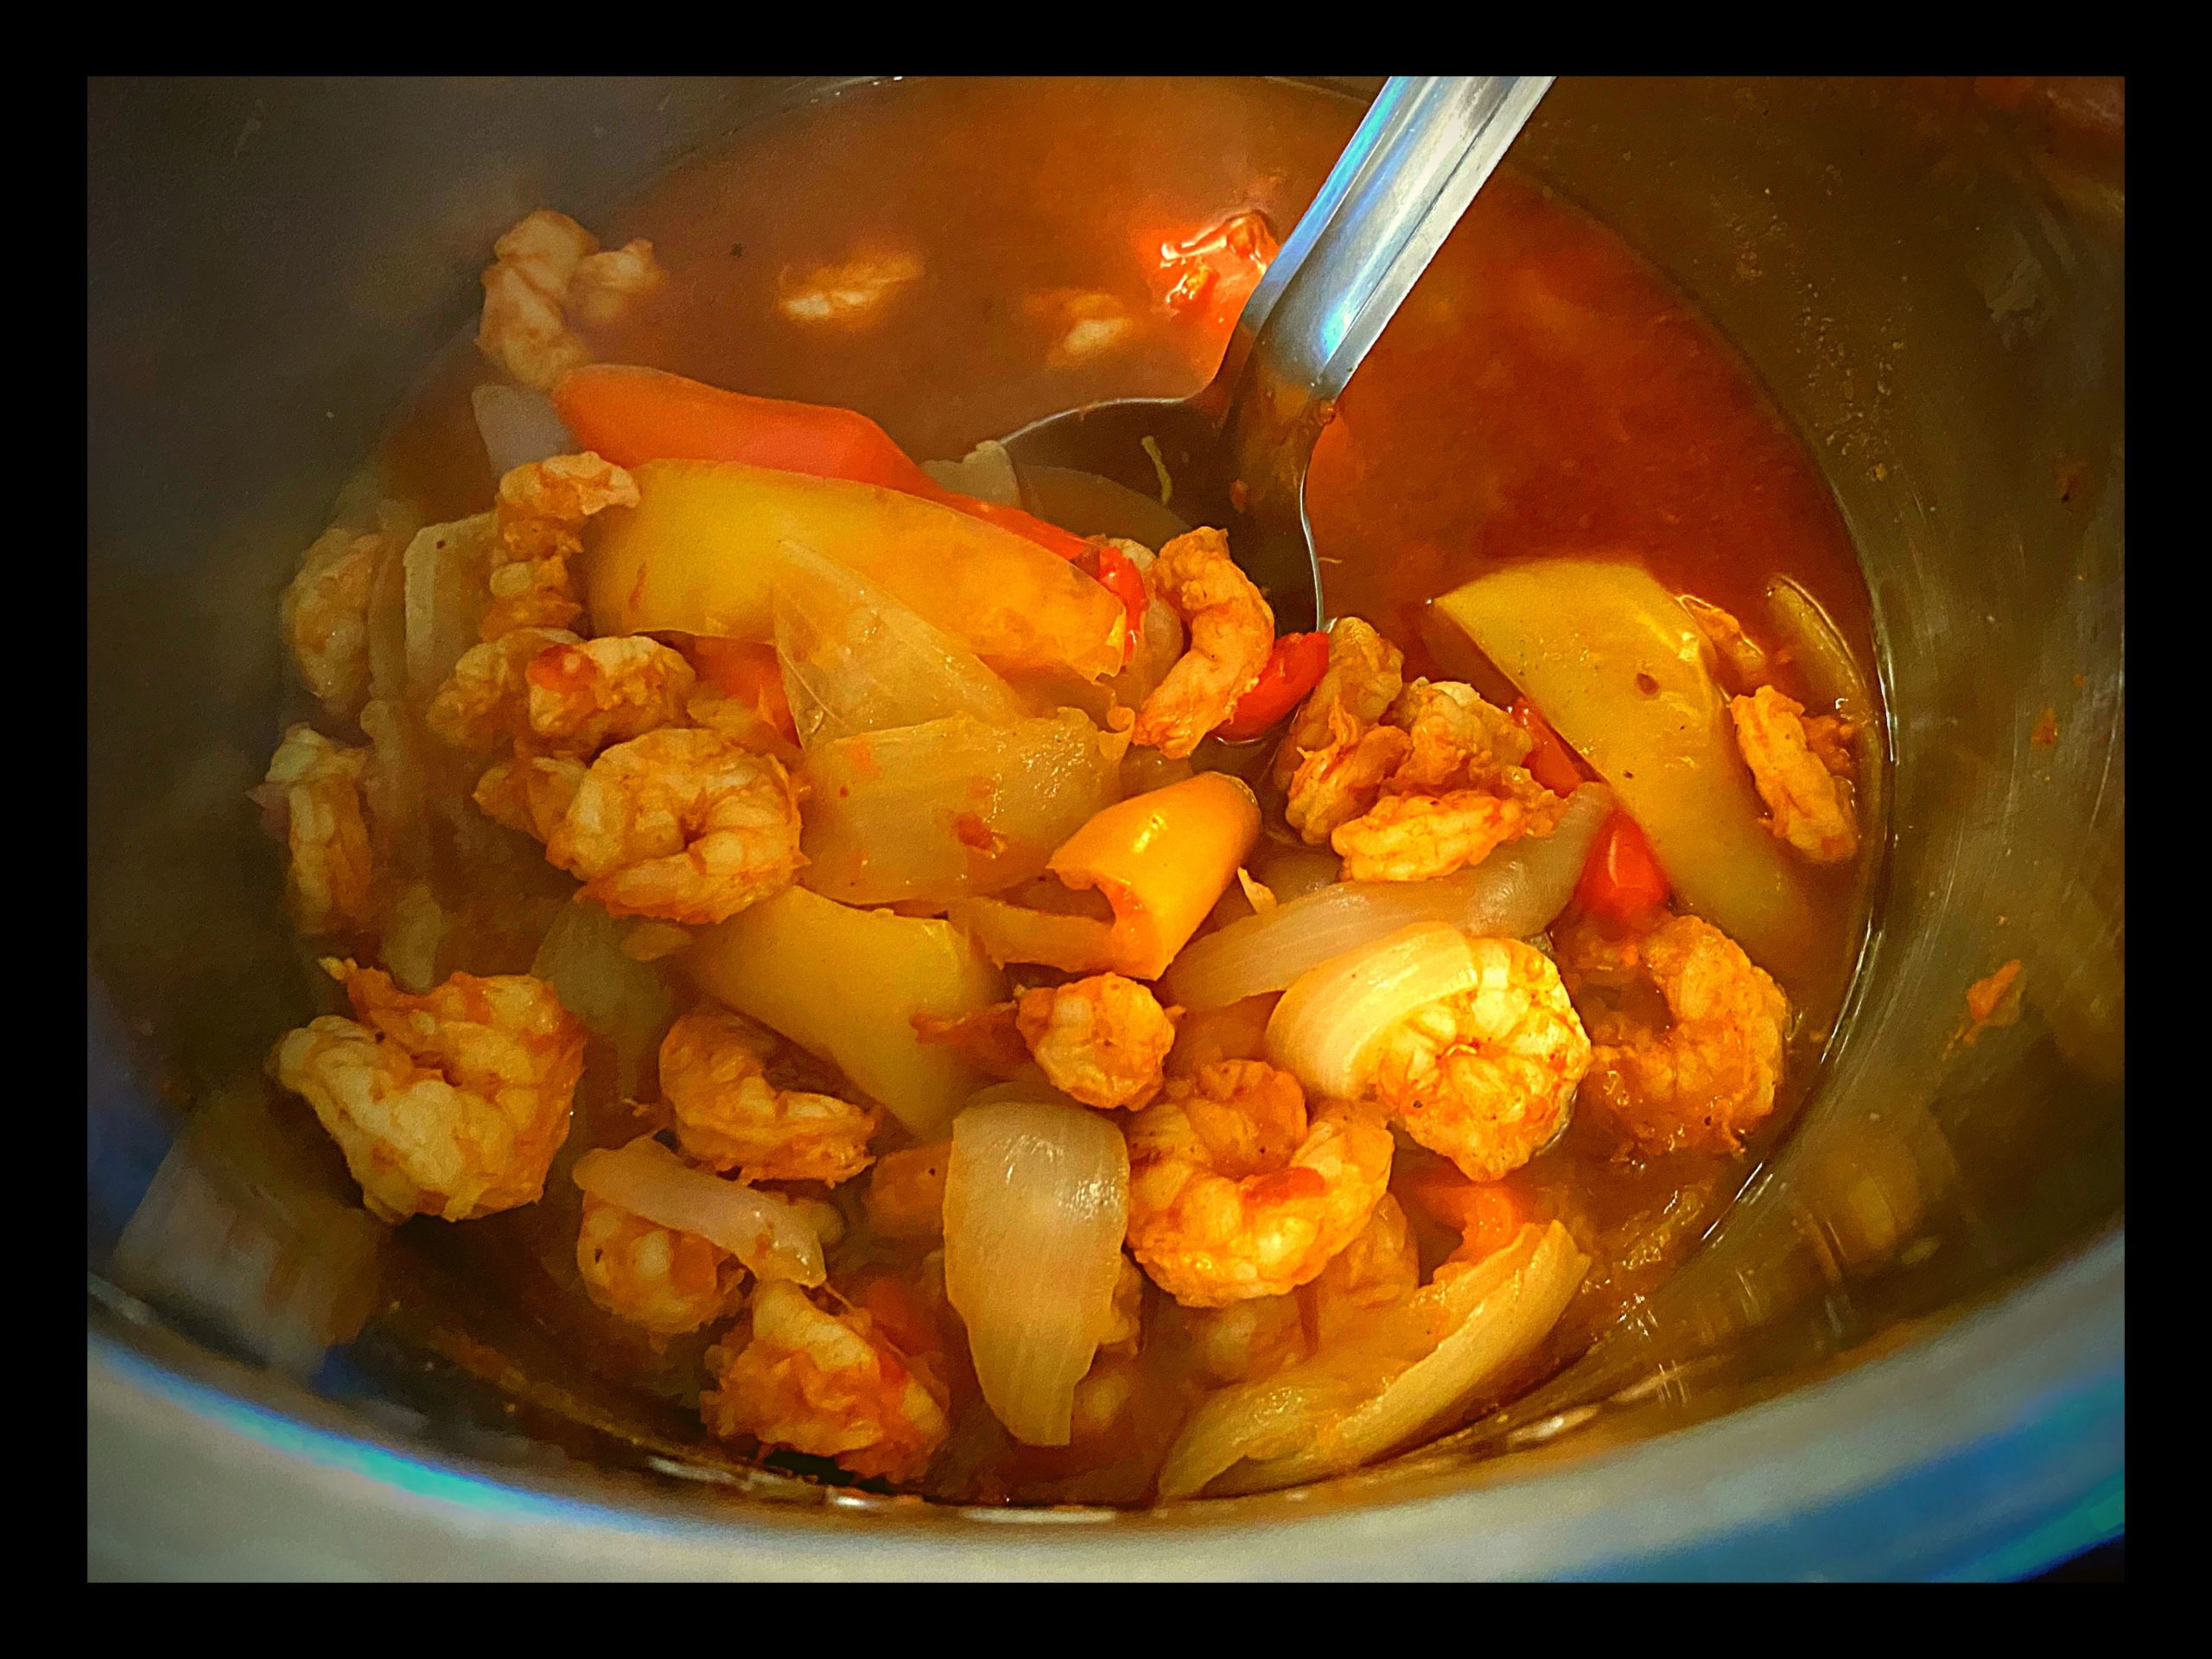 The inside of an Instant Pot filled with cooked shrimp, onions, and bell peppers in a red fajita sauce.